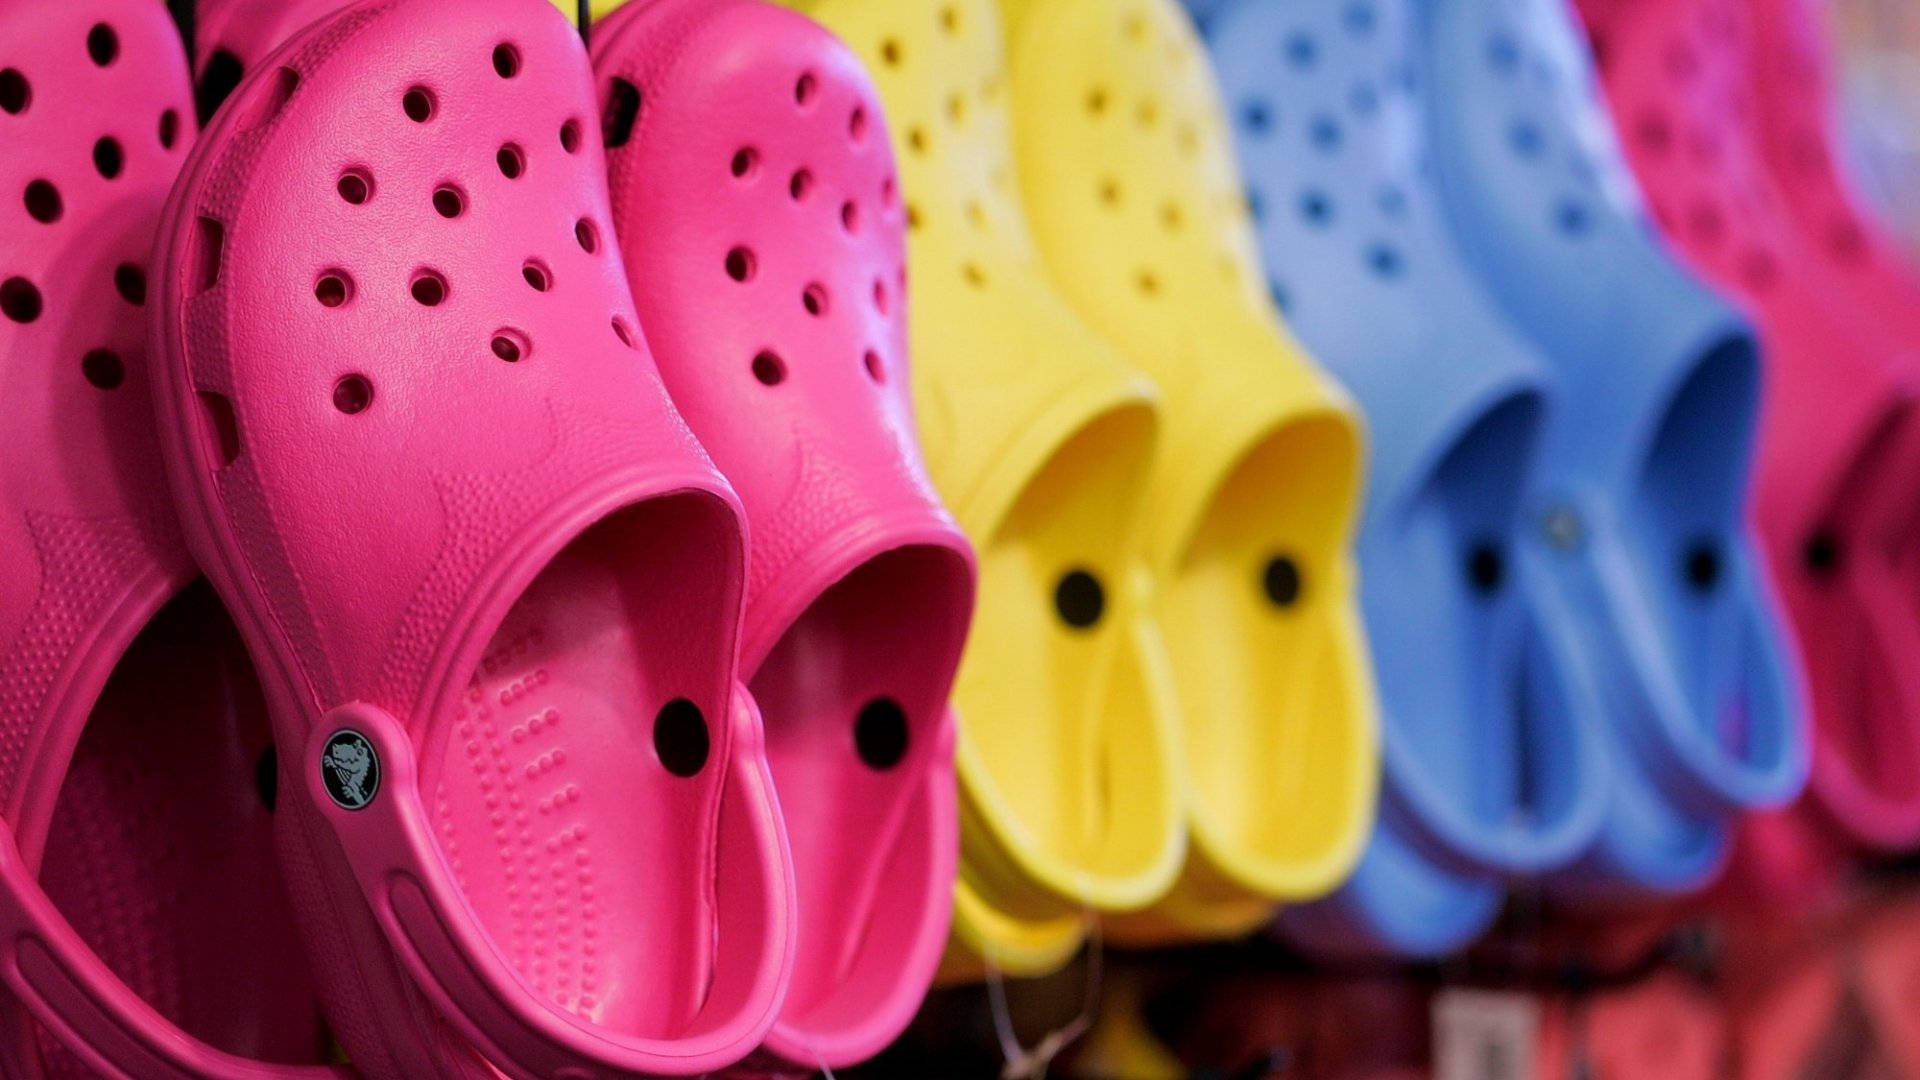 Colorful Array Of Crocs Footwear On Display Background